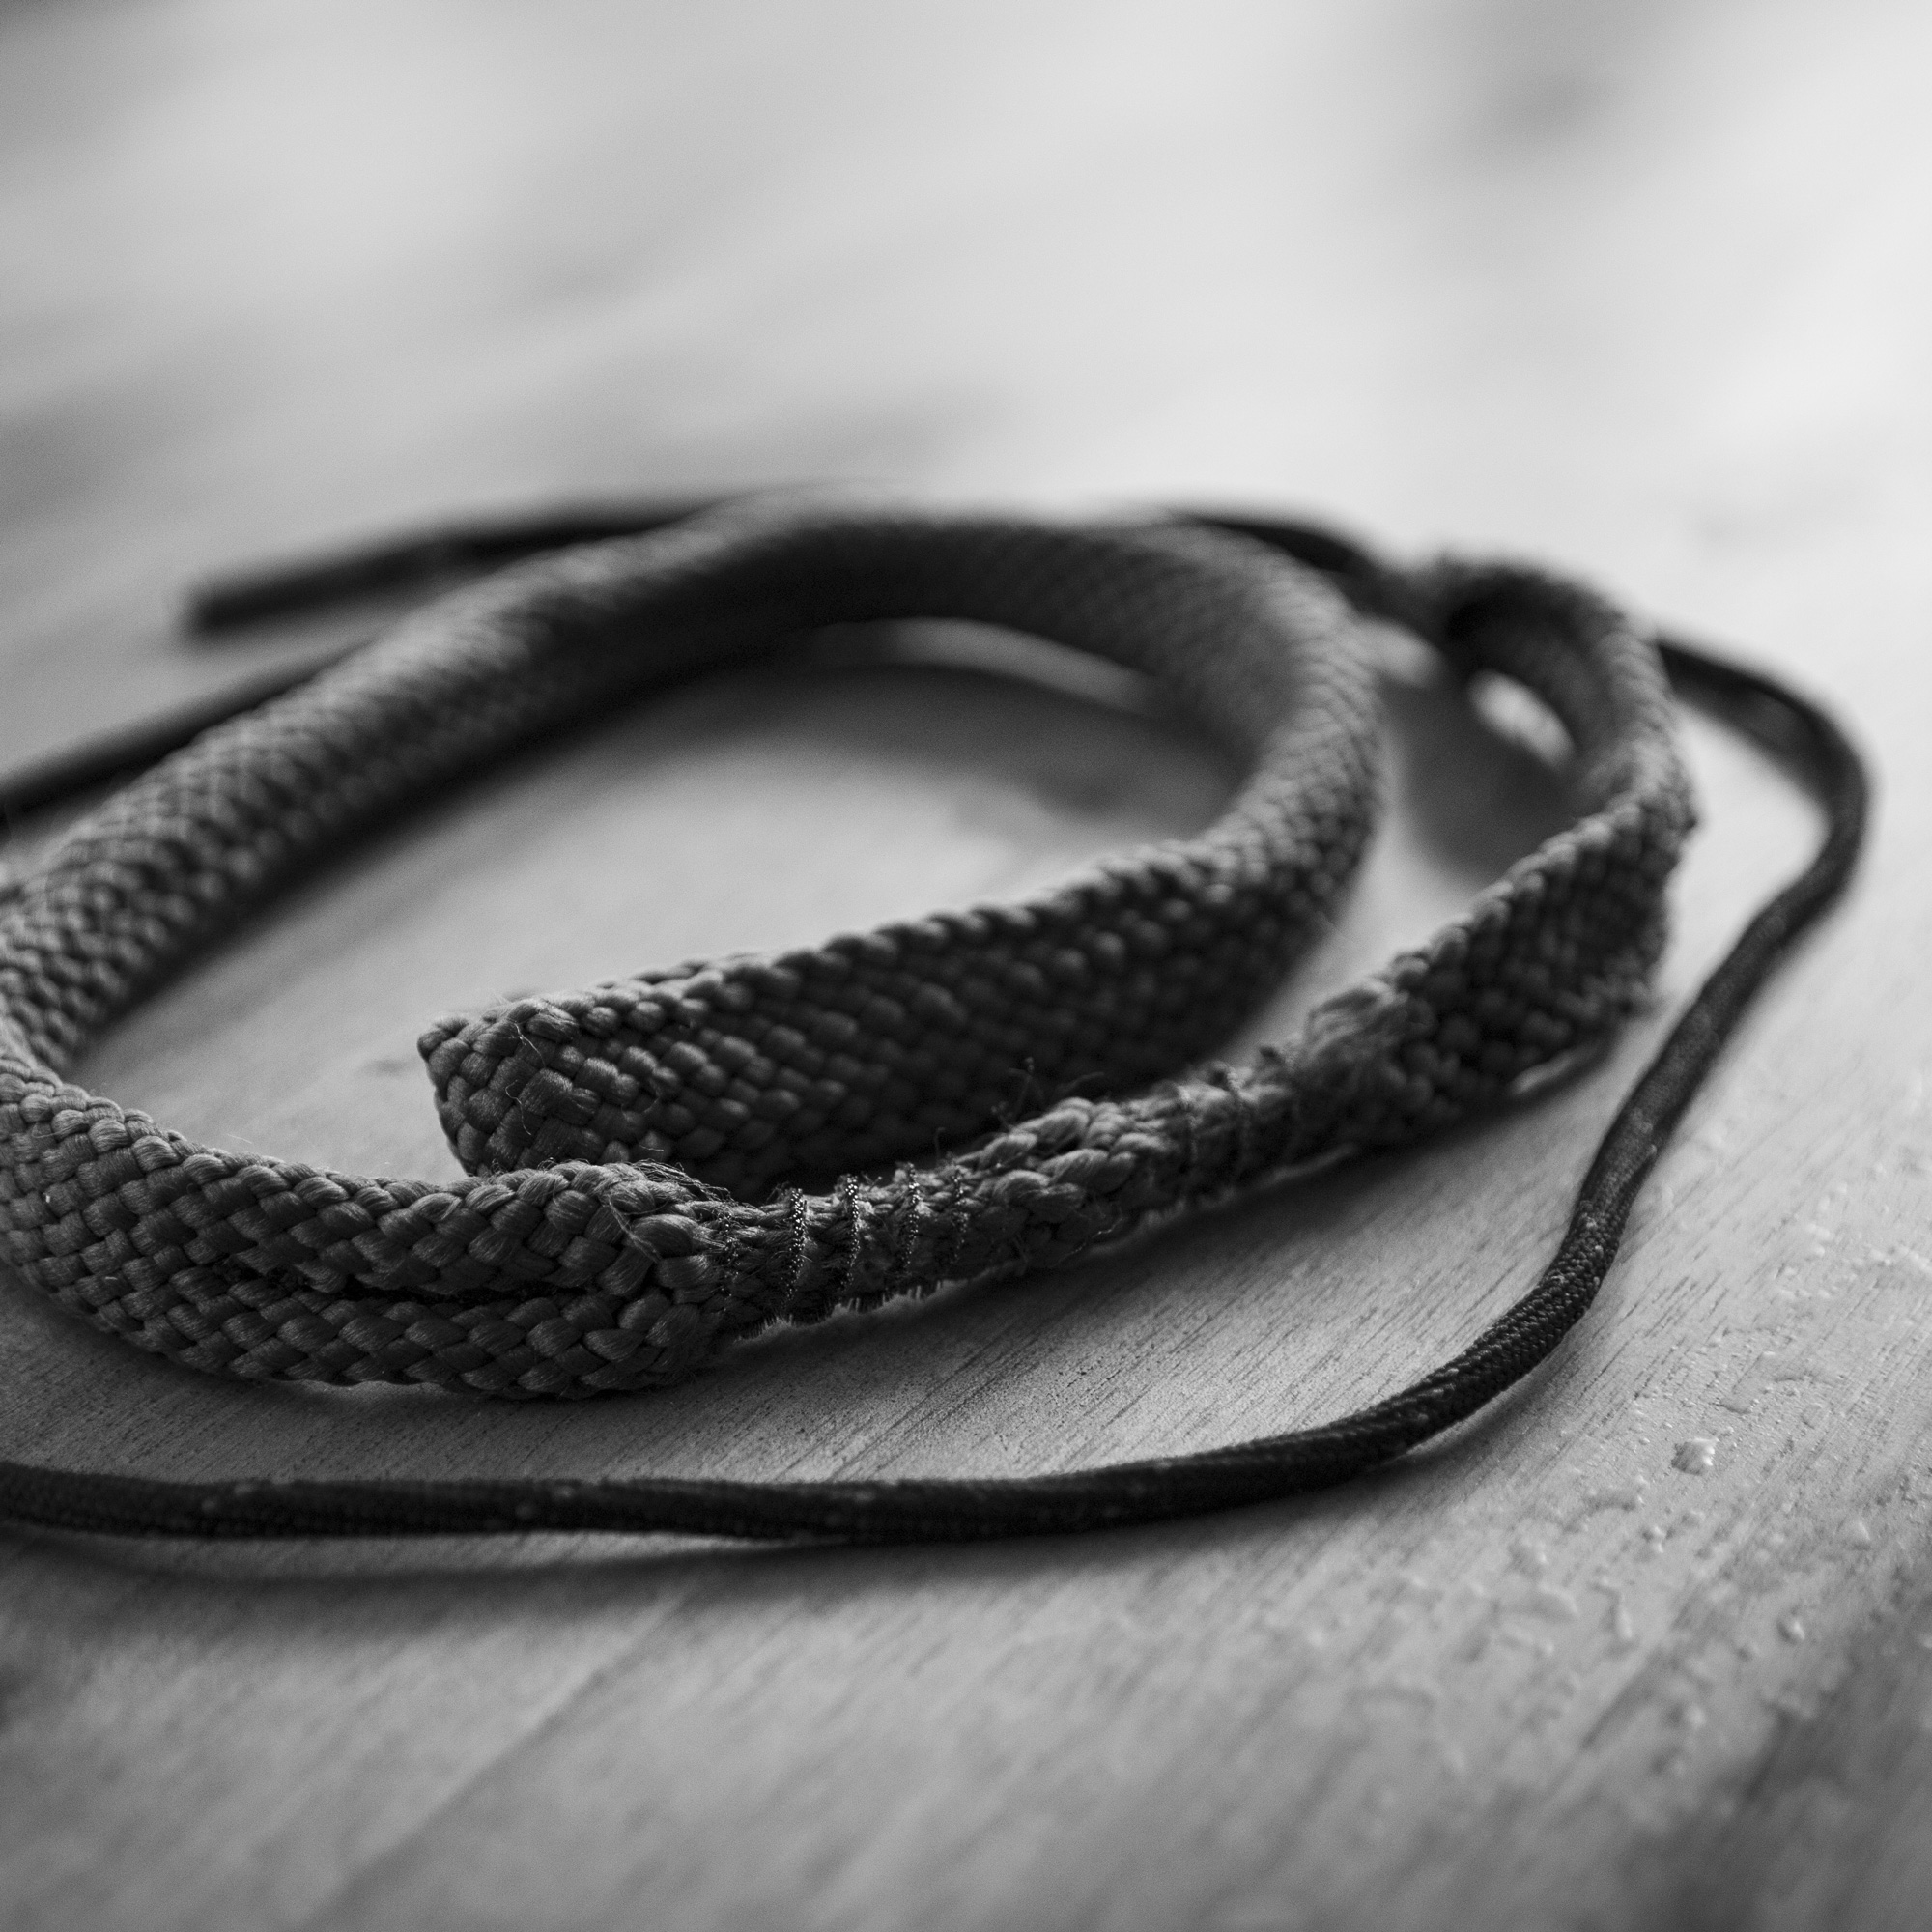 Bore snake for gun cleaning and concealed carry